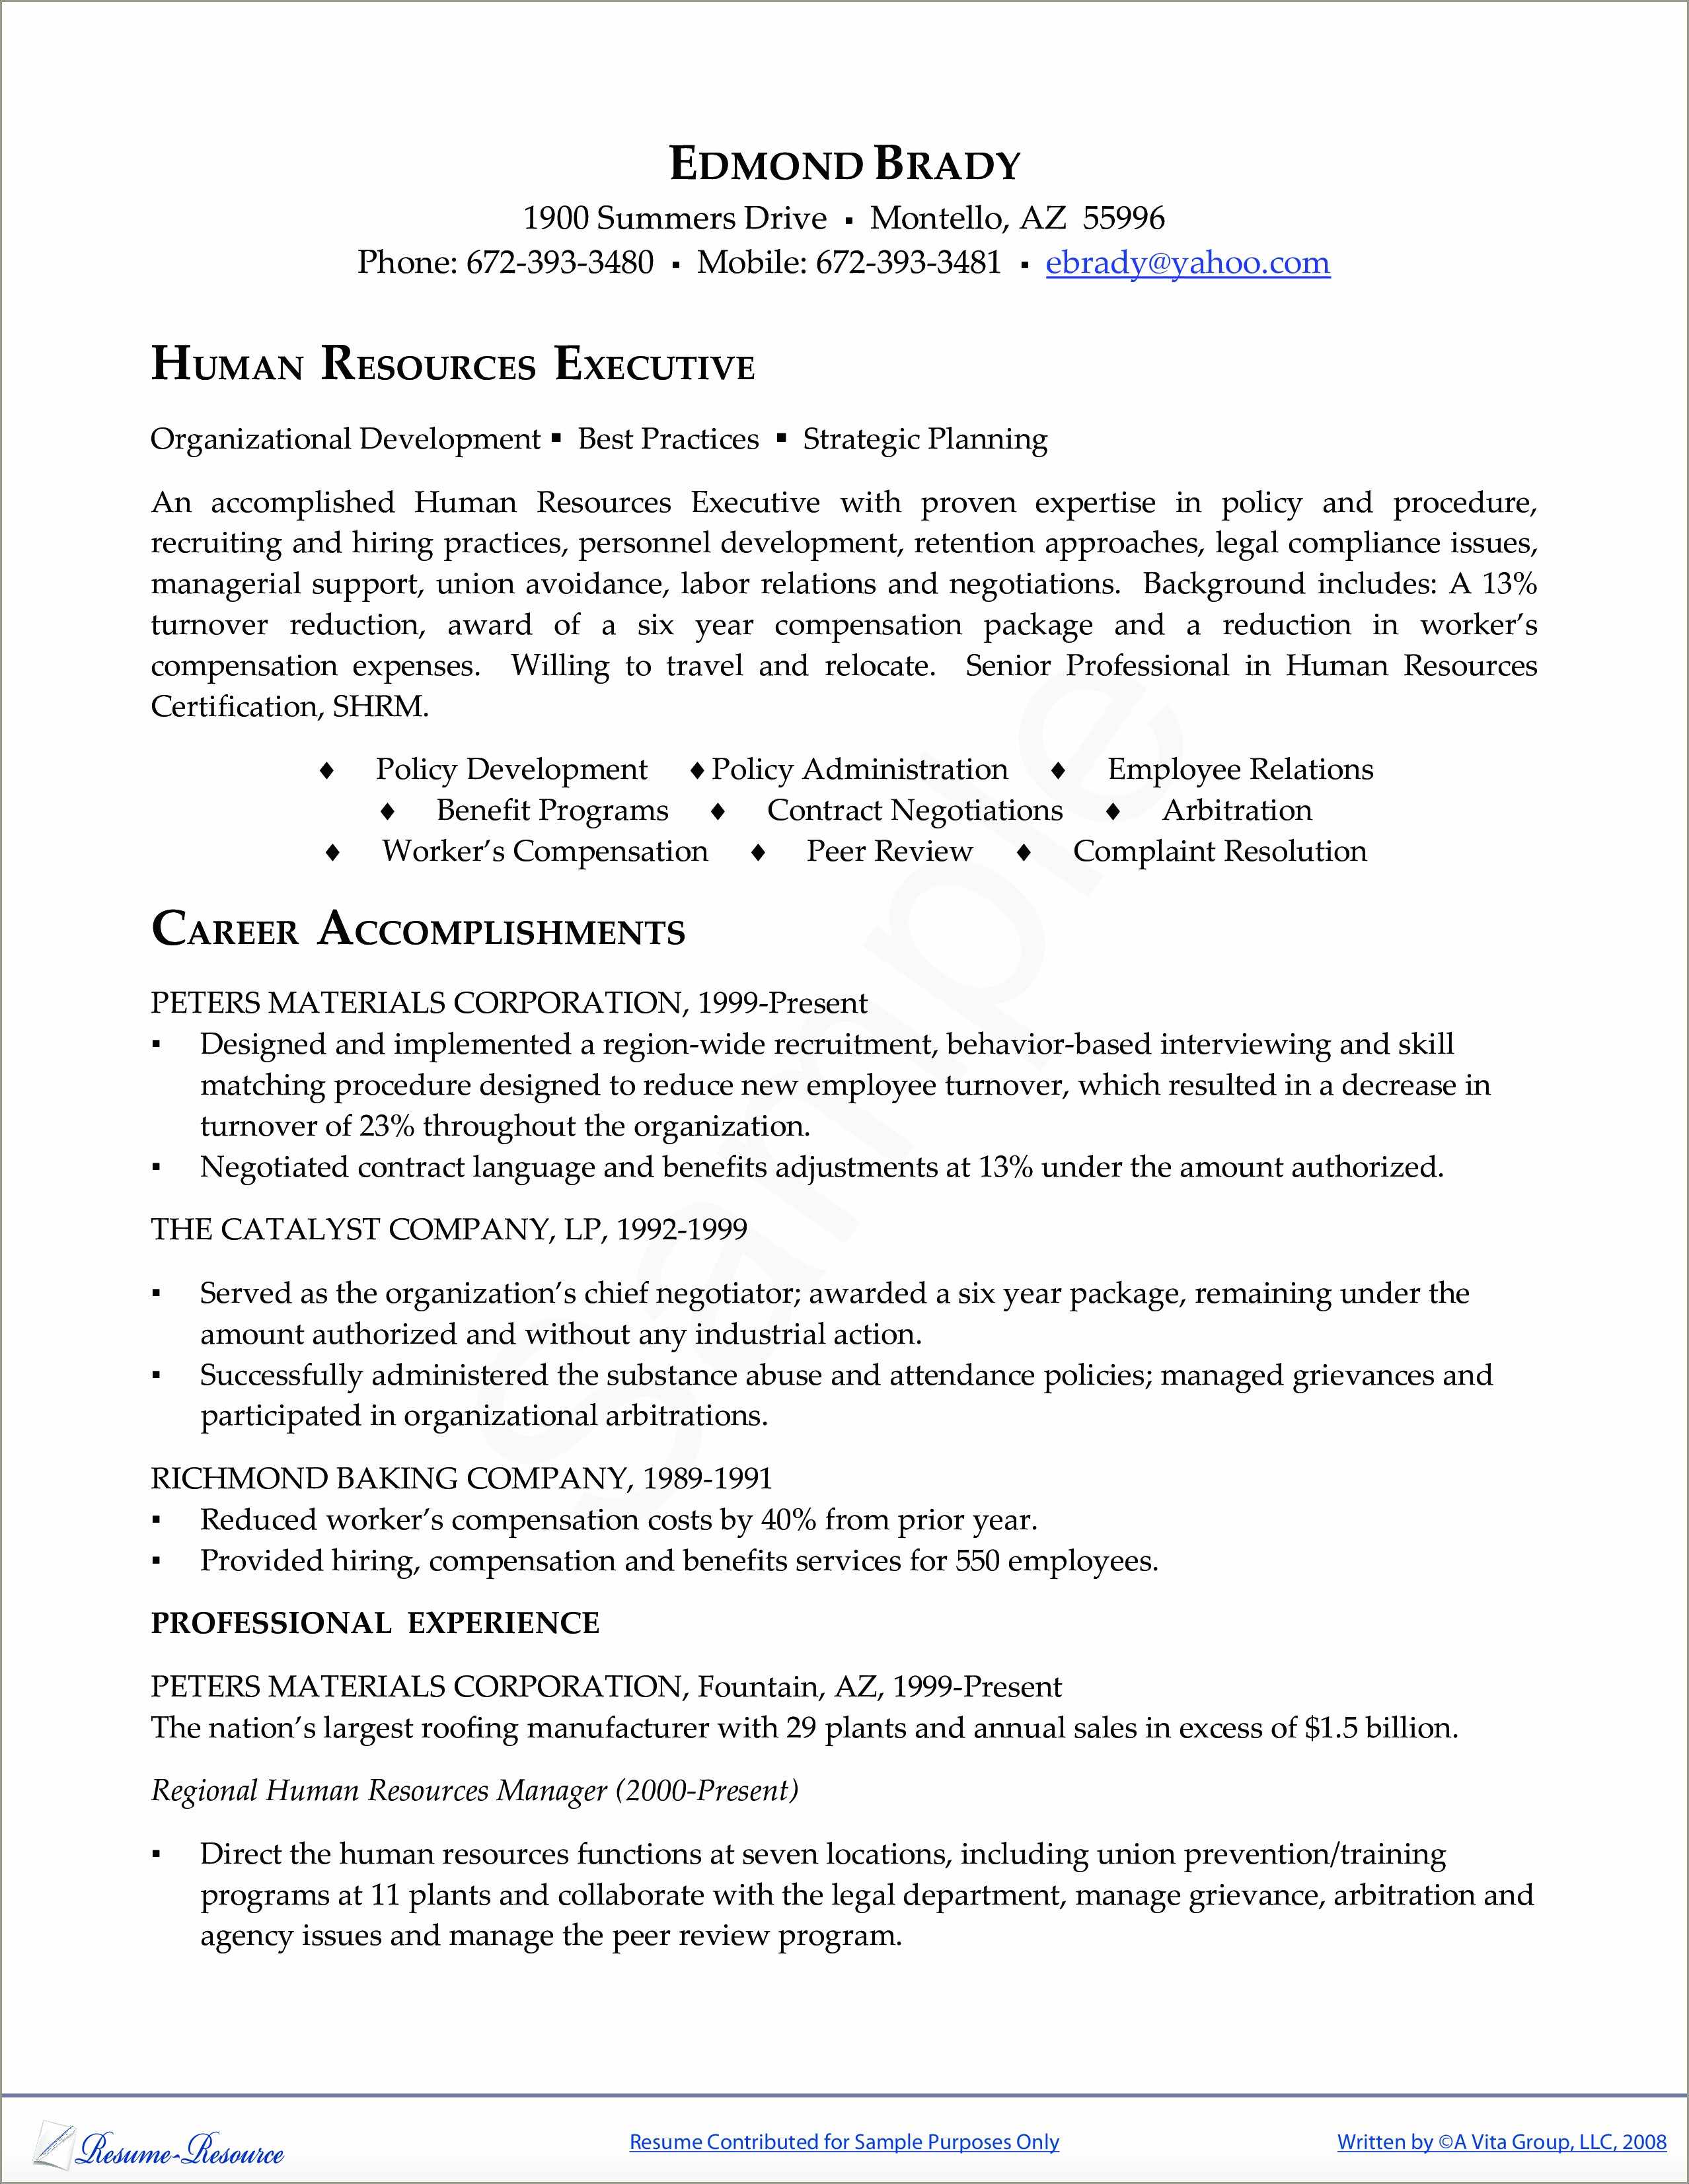 Resume Samples For Human Resources Executive